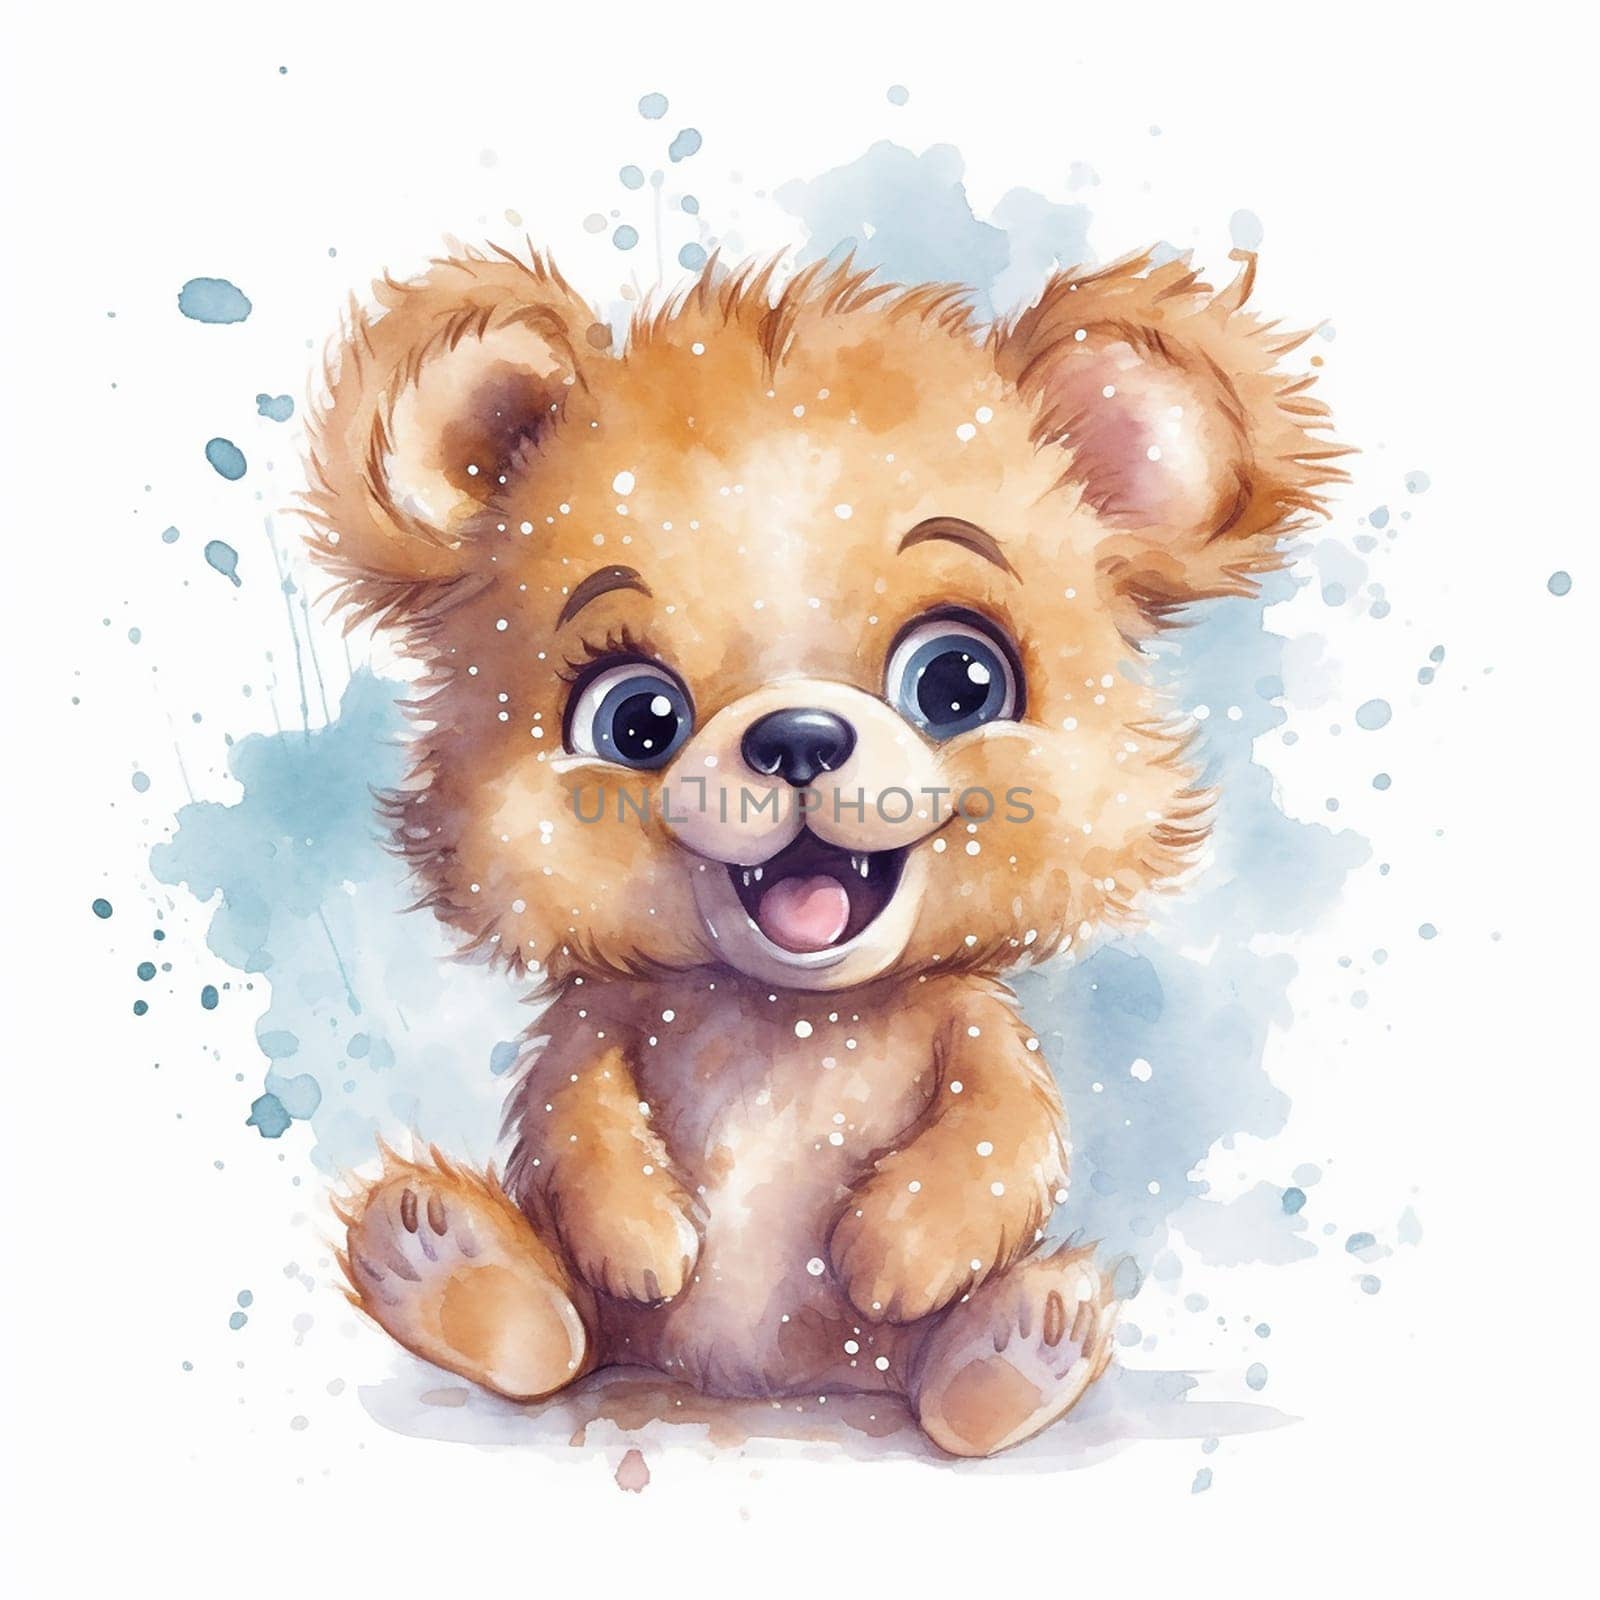 A watercolor painting of a cub brown bear, funny and adorable wallpaper, white background